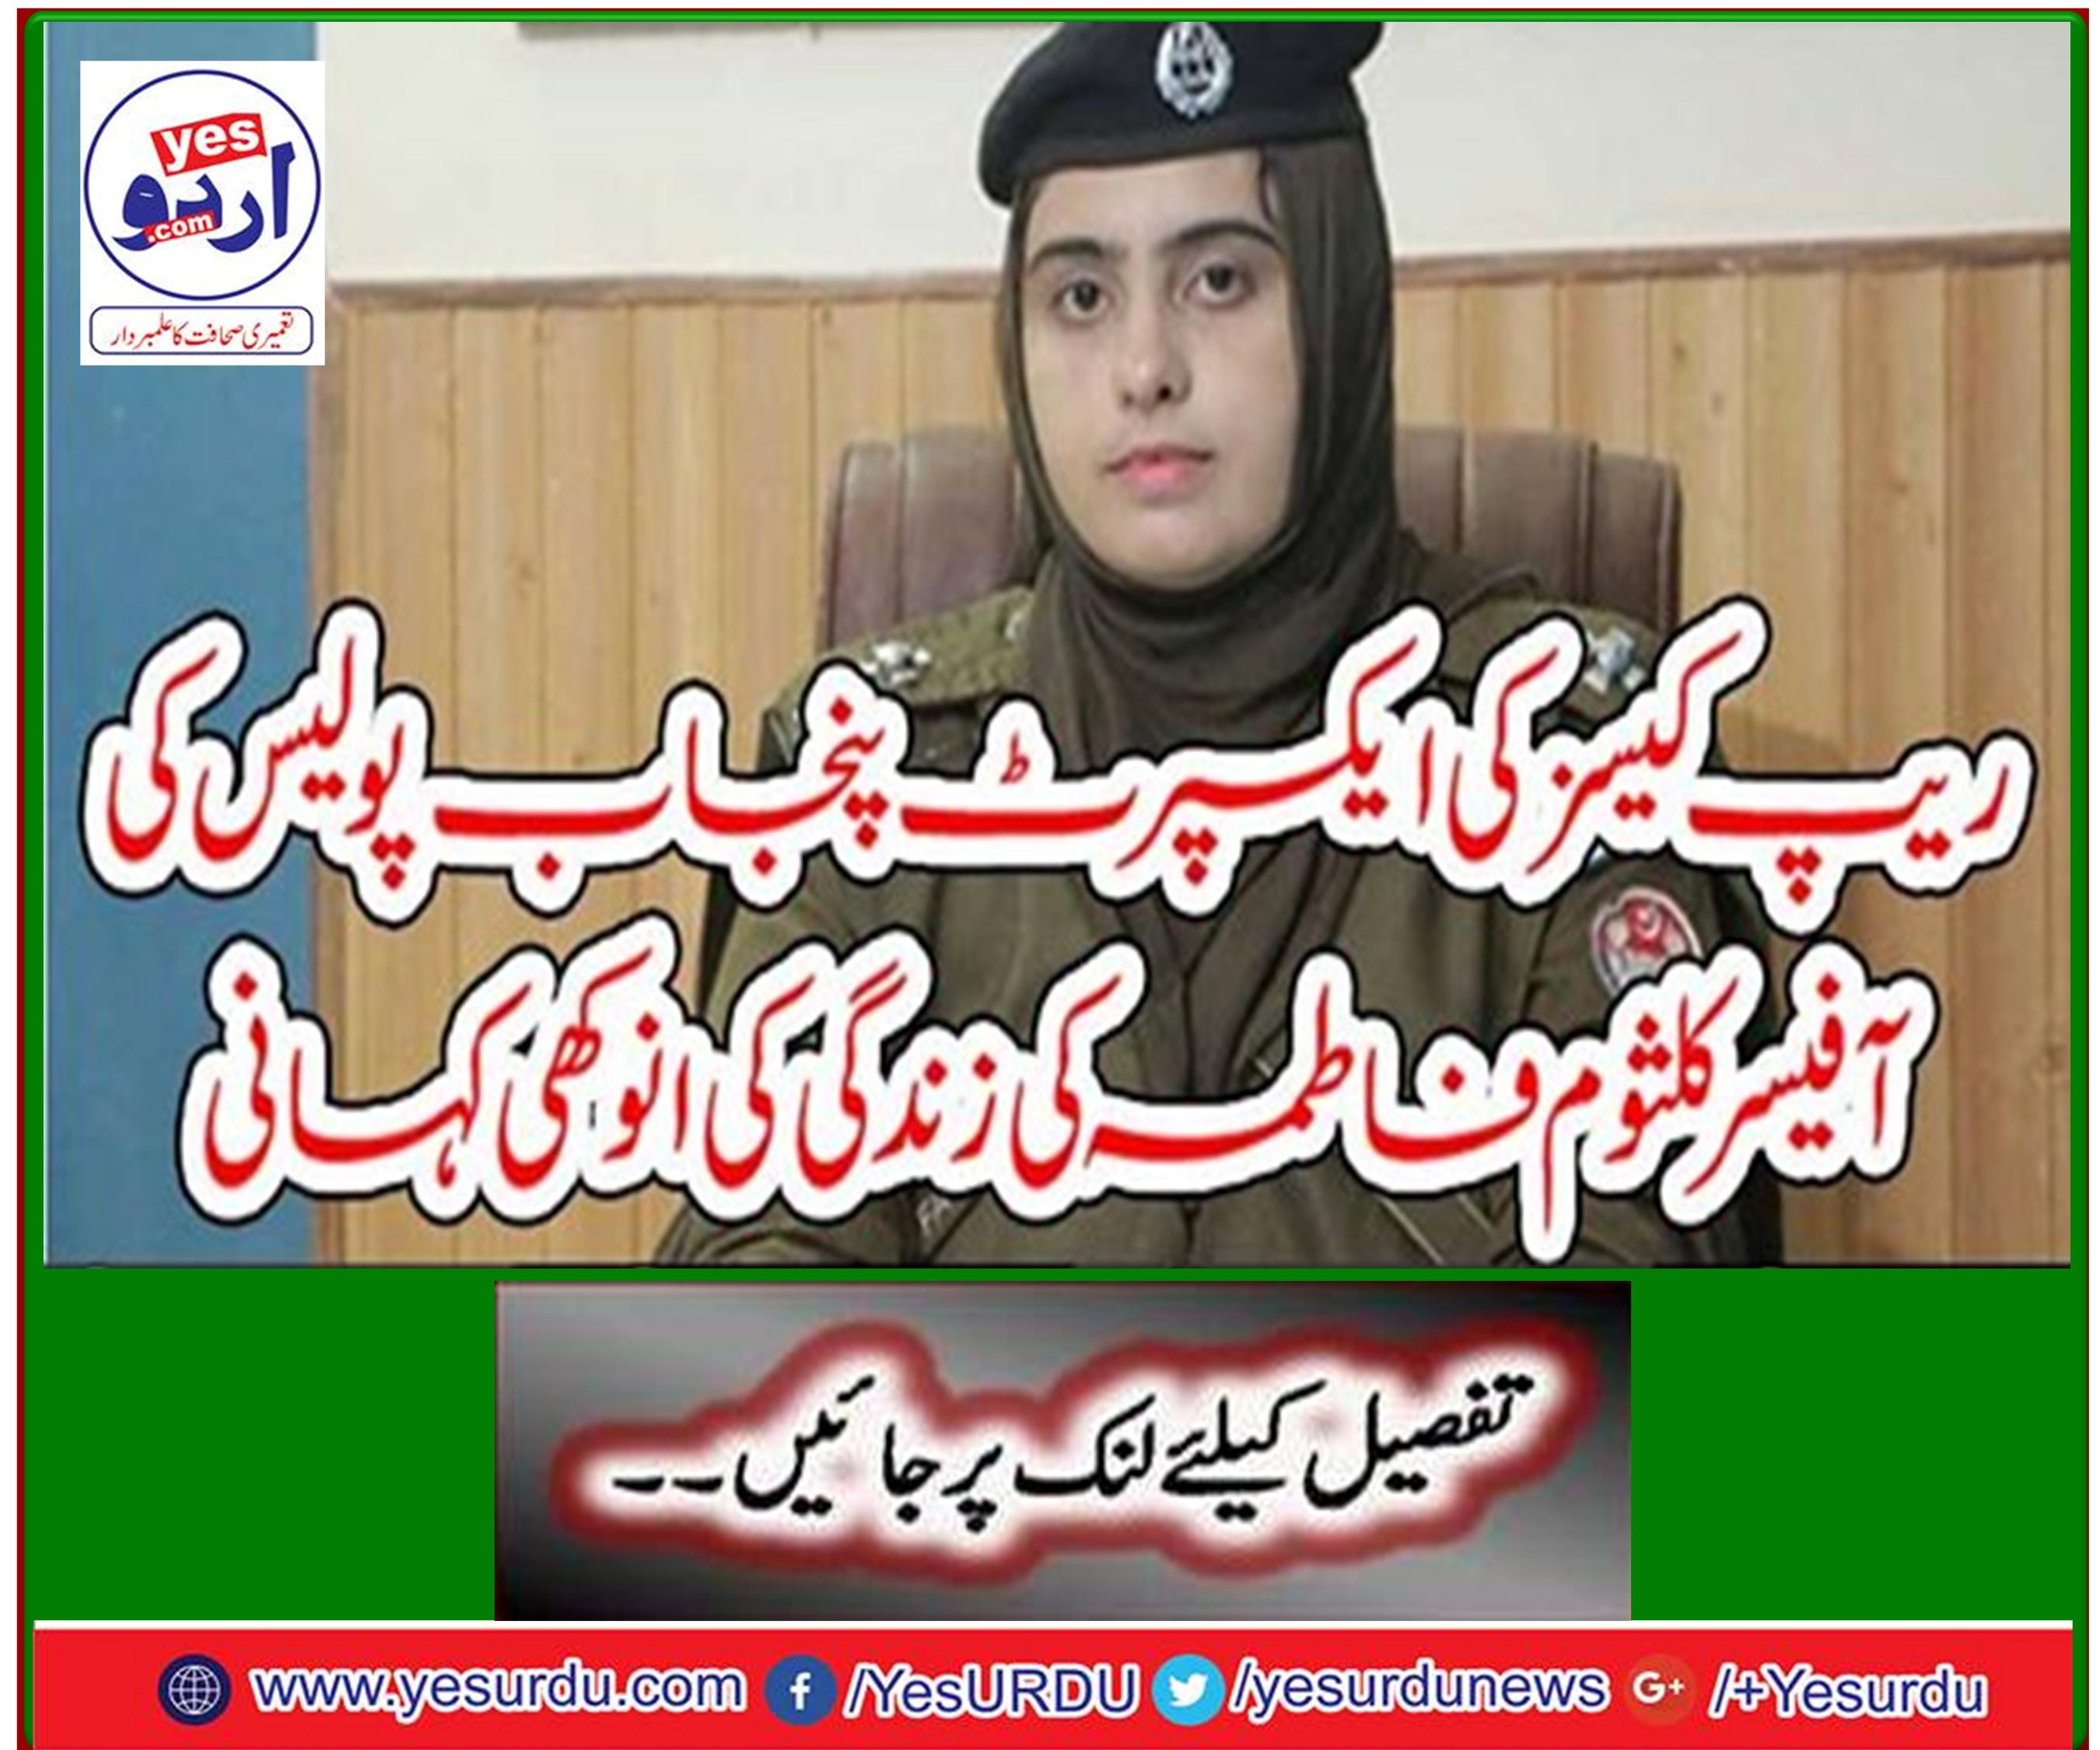 The story of the life of Expat Punjab police officer Kulsoom Fatima in rap cases